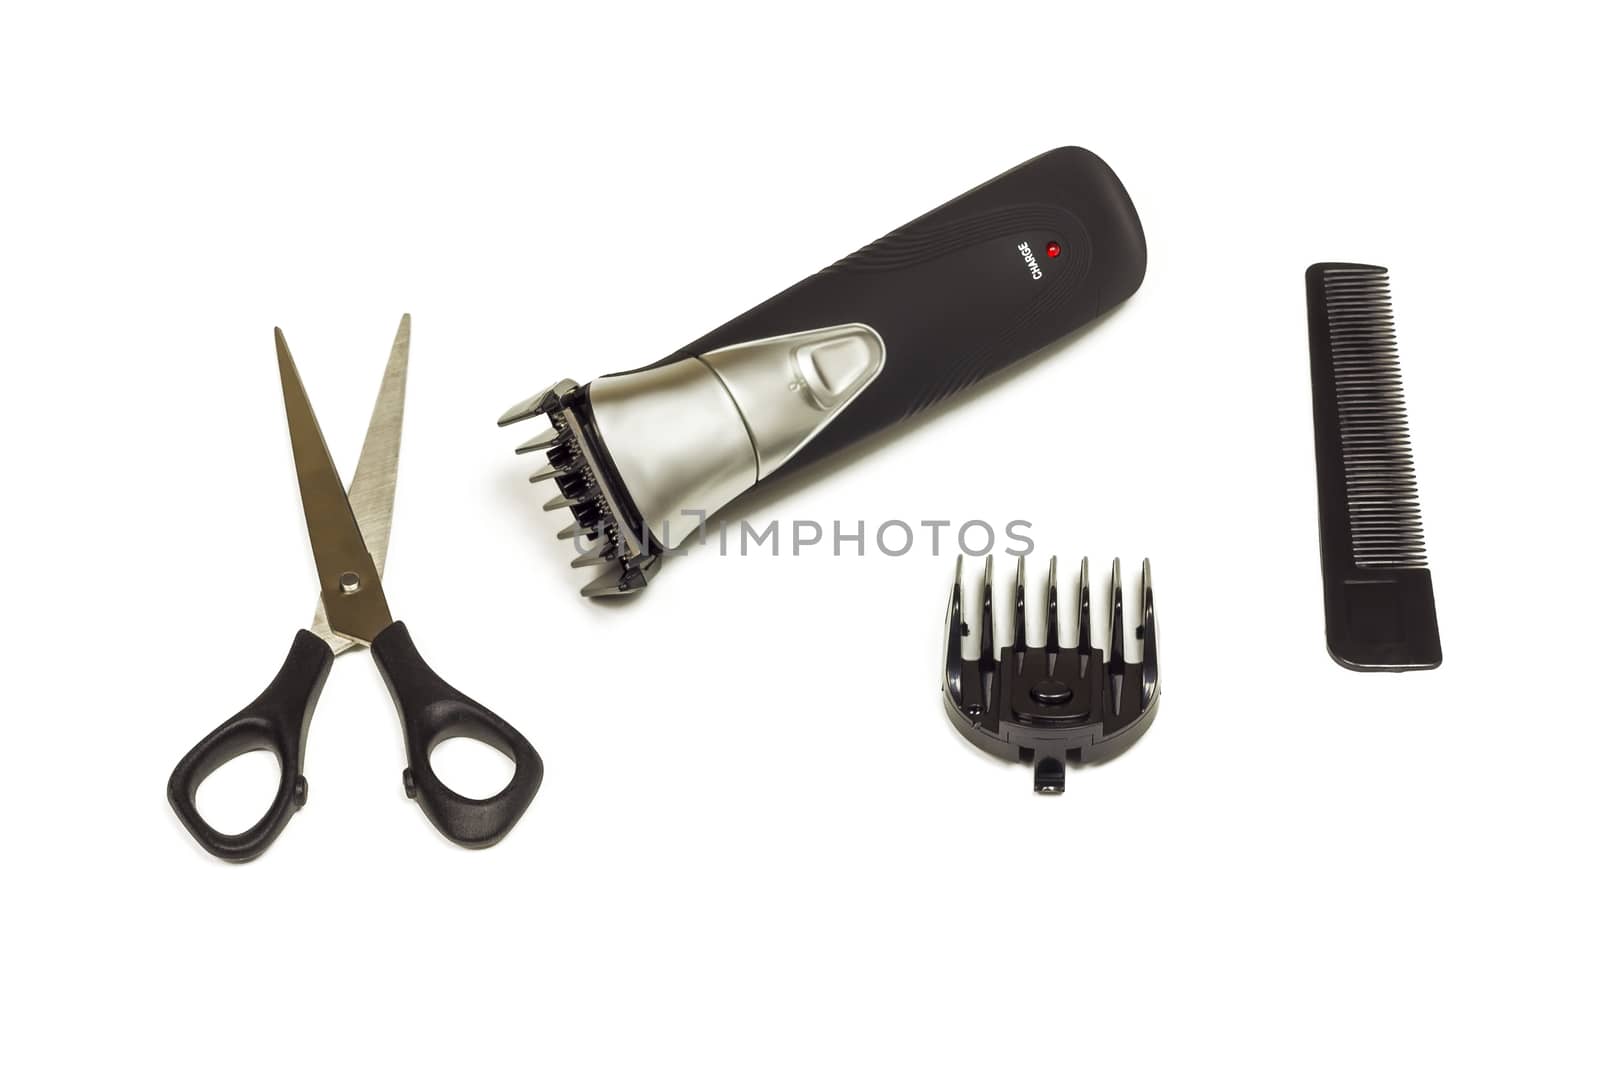 Hair clipper with nozzle, scissors and comb by Grommik